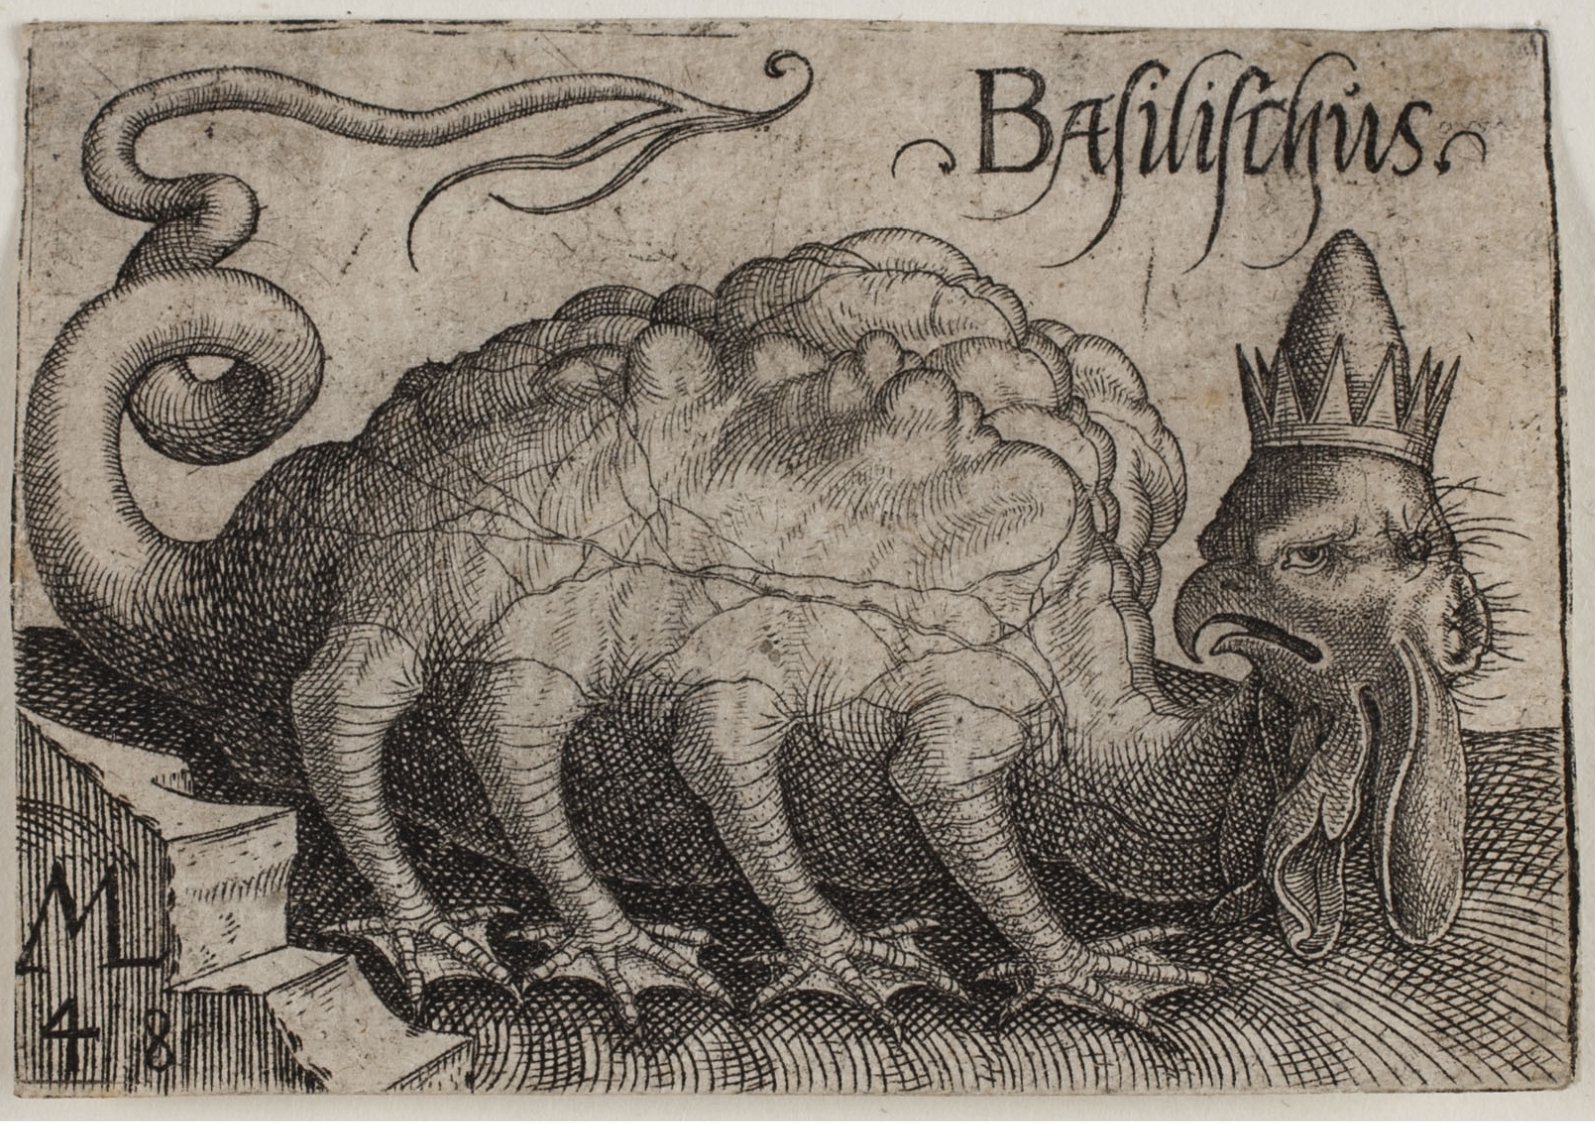 drawing of an animal with a crown on its head.